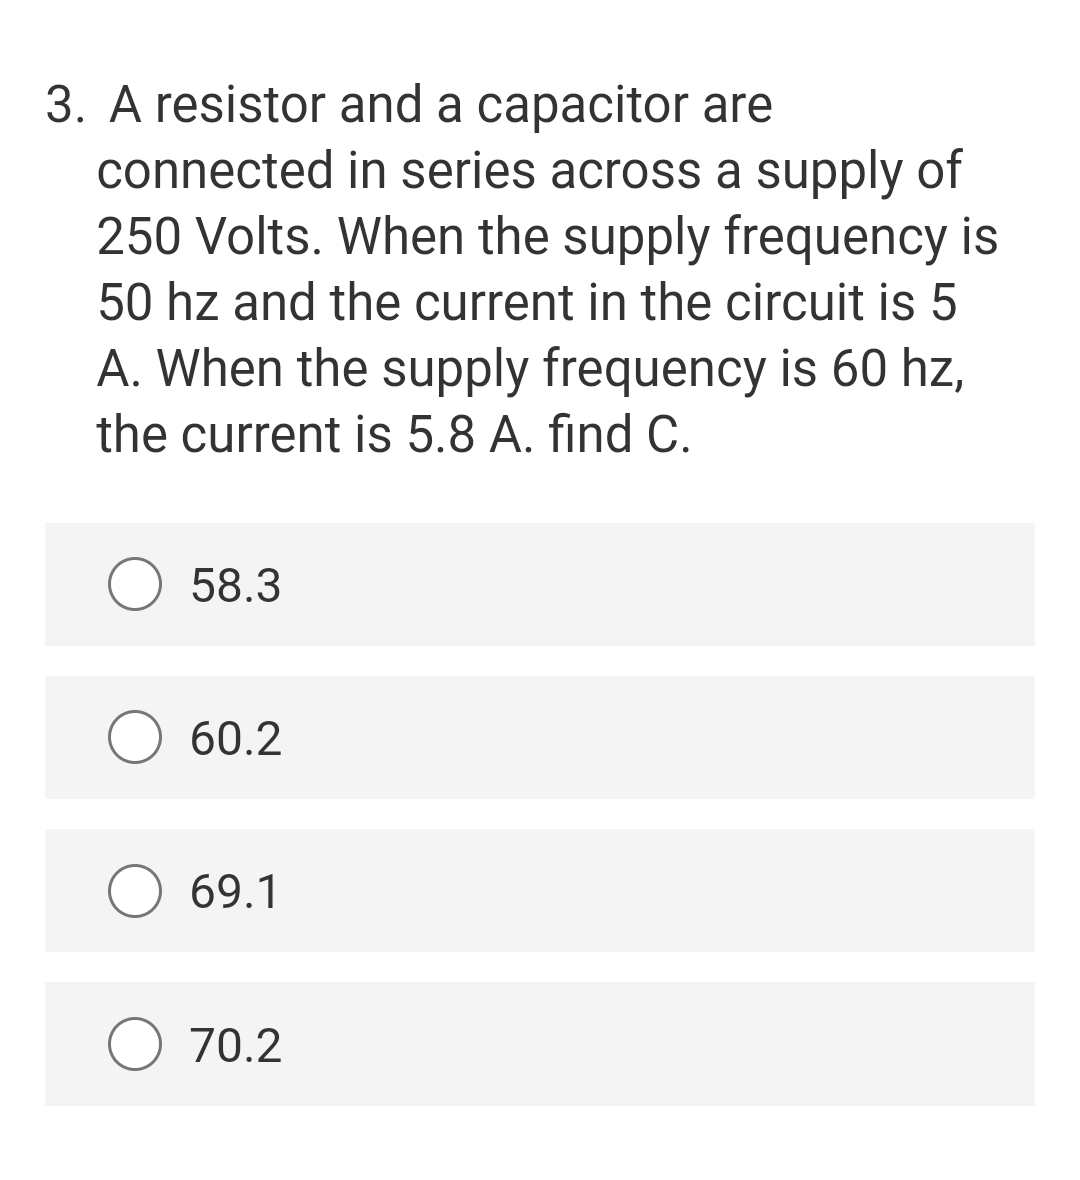 3. A resistor and a capacitor are
connected in series across a supply of
250 Volts. When the supply frequency is
50 hz and the current in the circuit is 5
A. When the supply frequency is 60 hz,
the current is 5.8 A. find C.
O 58.3
60.2
69.1
O 70.2
